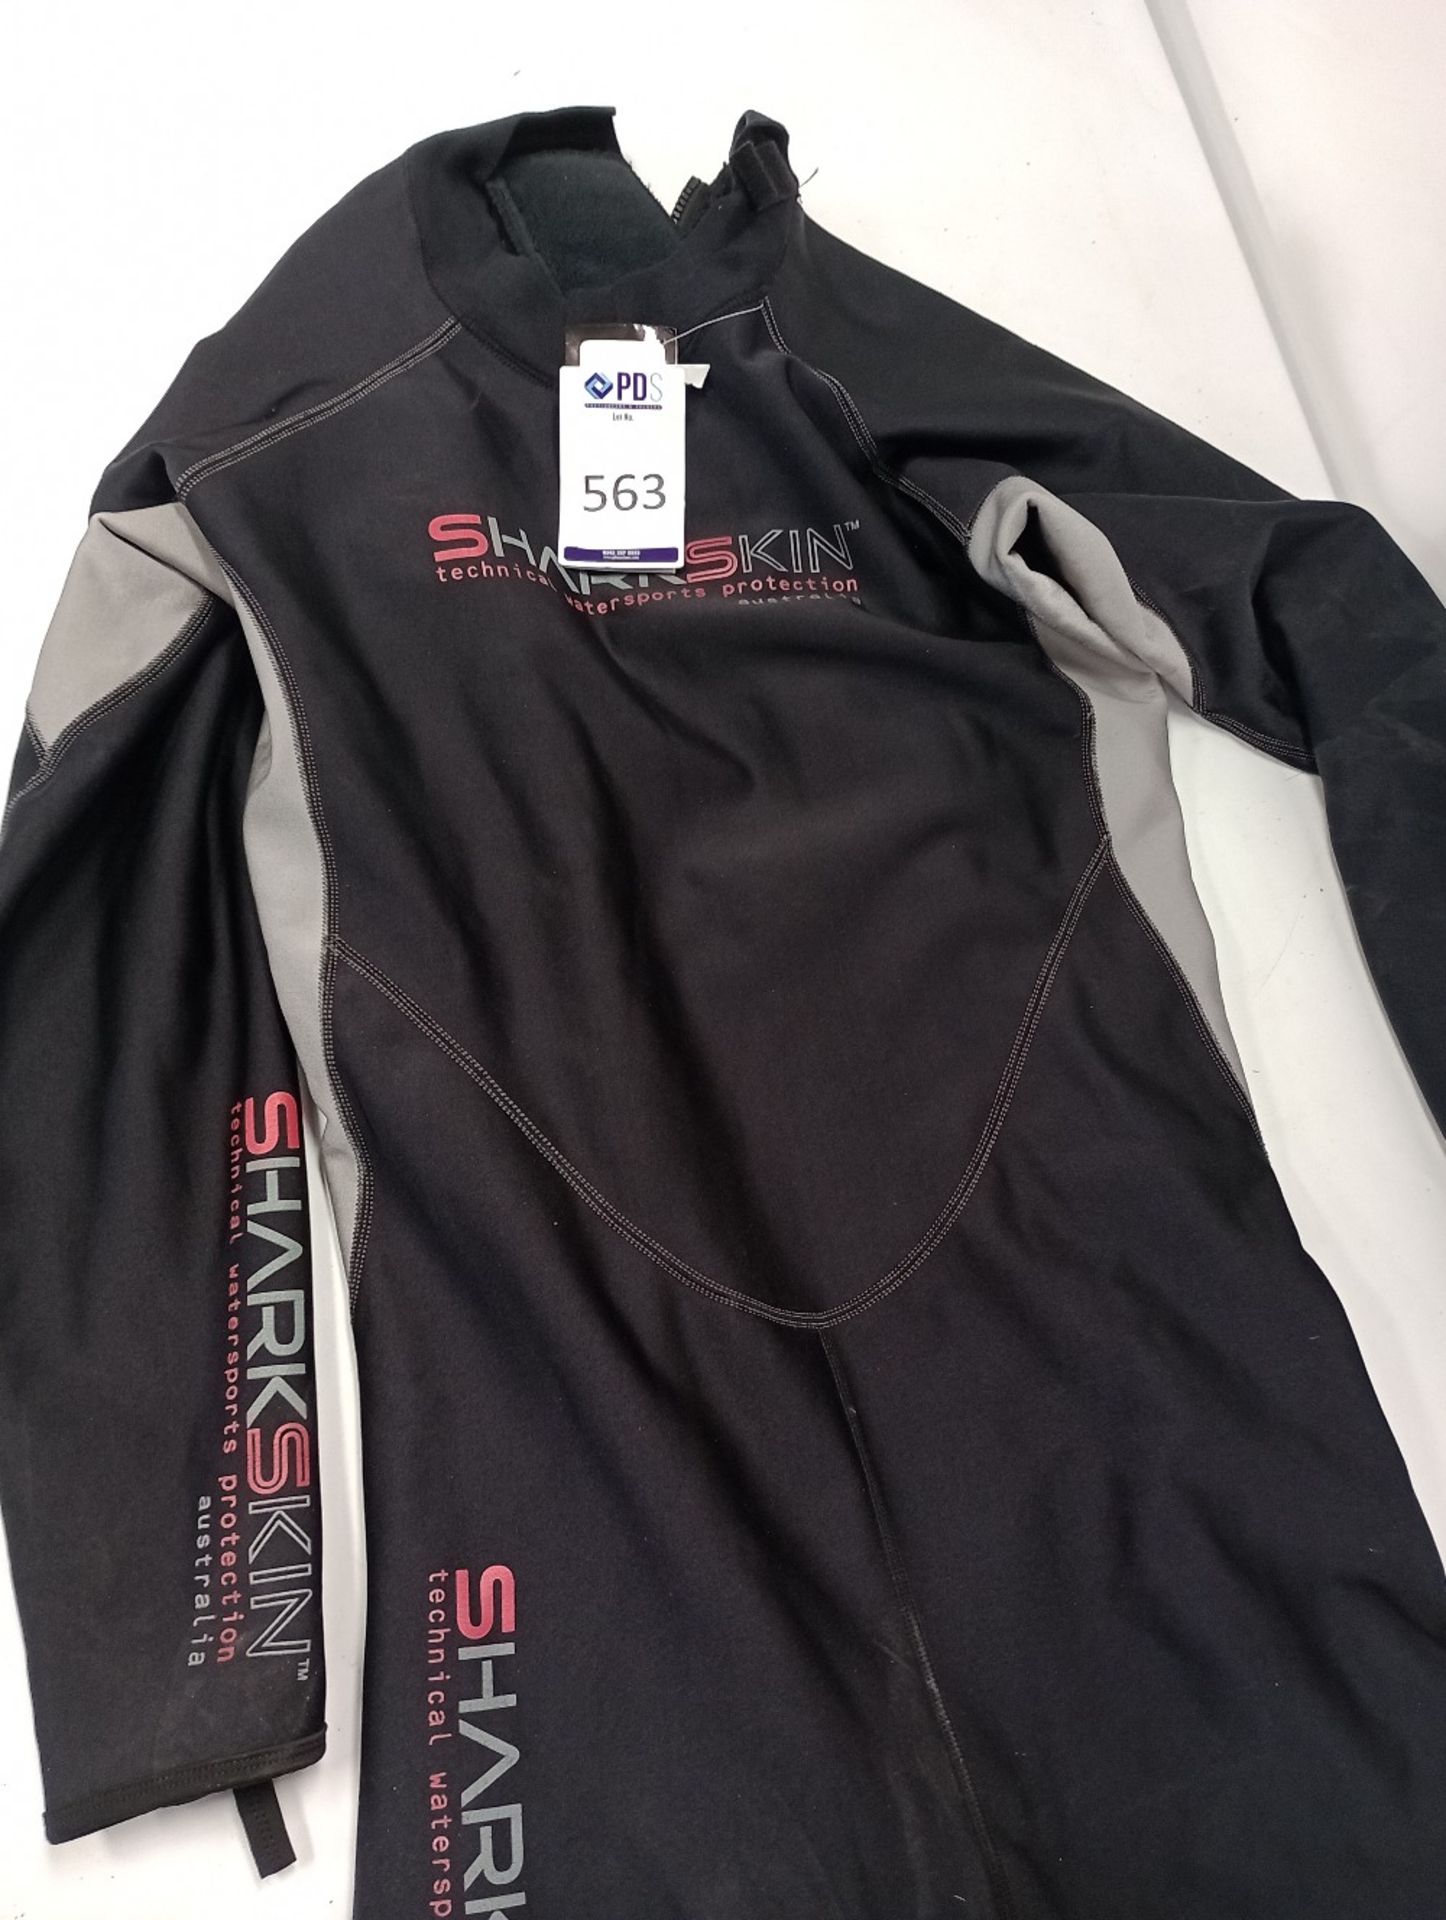 Sharkskin Technical Watersports Protection, Size 2XL (Location: Brentwood. Please Refer to General - Image 3 of 4